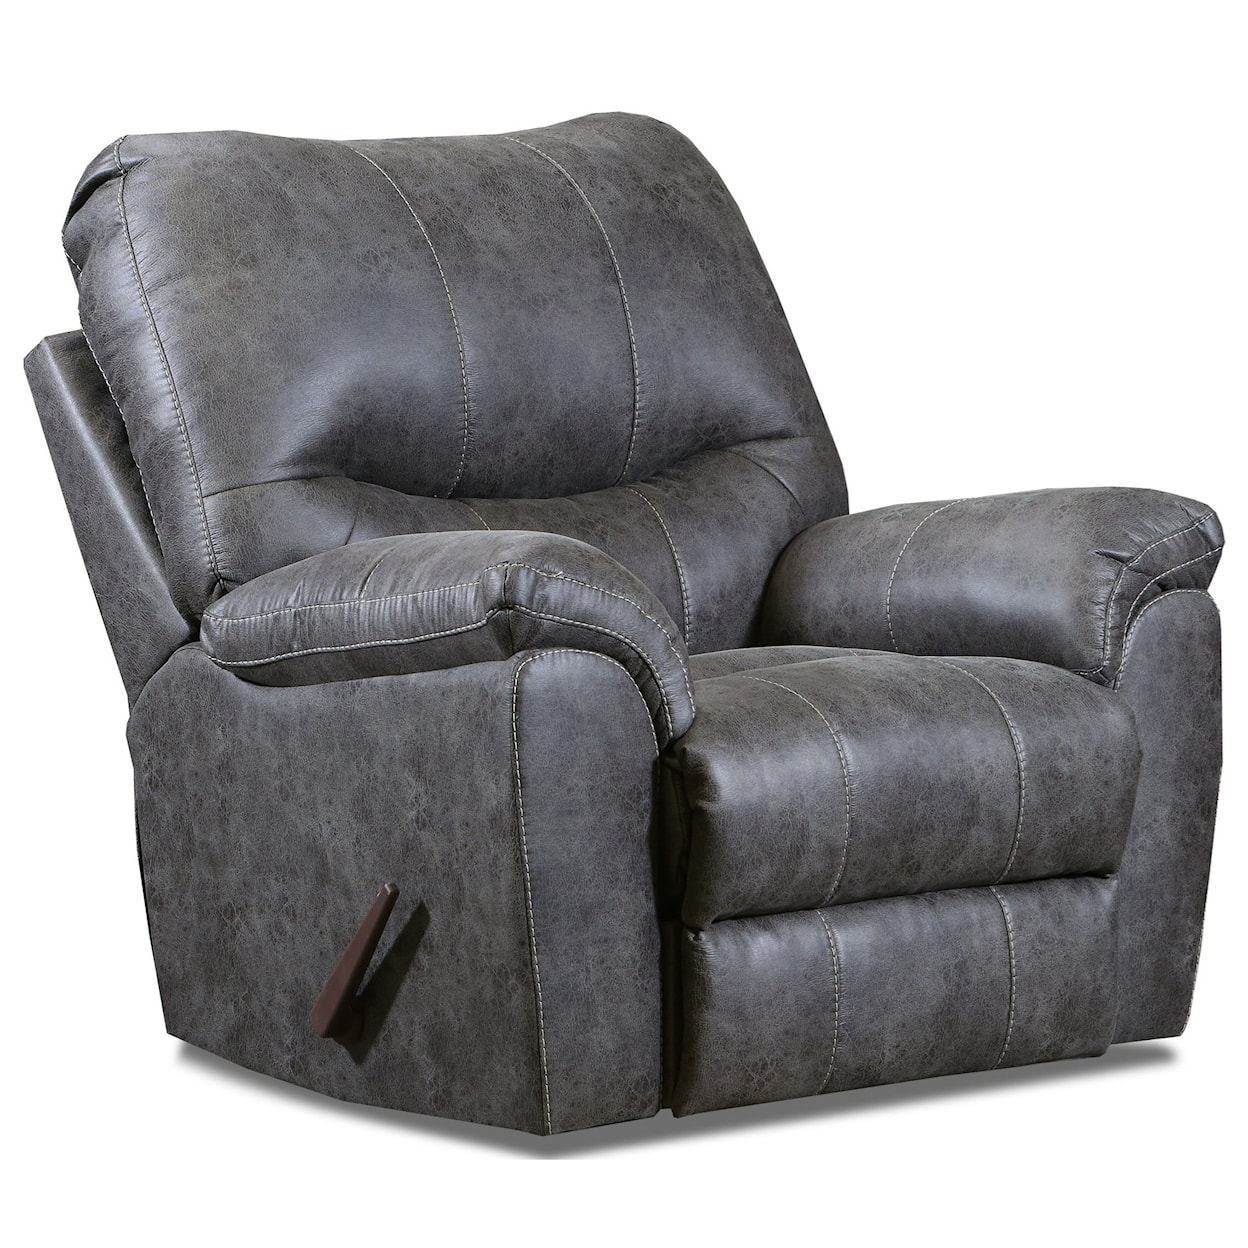 Peak Living 1780 Recliner Recliner with Pillow Arms